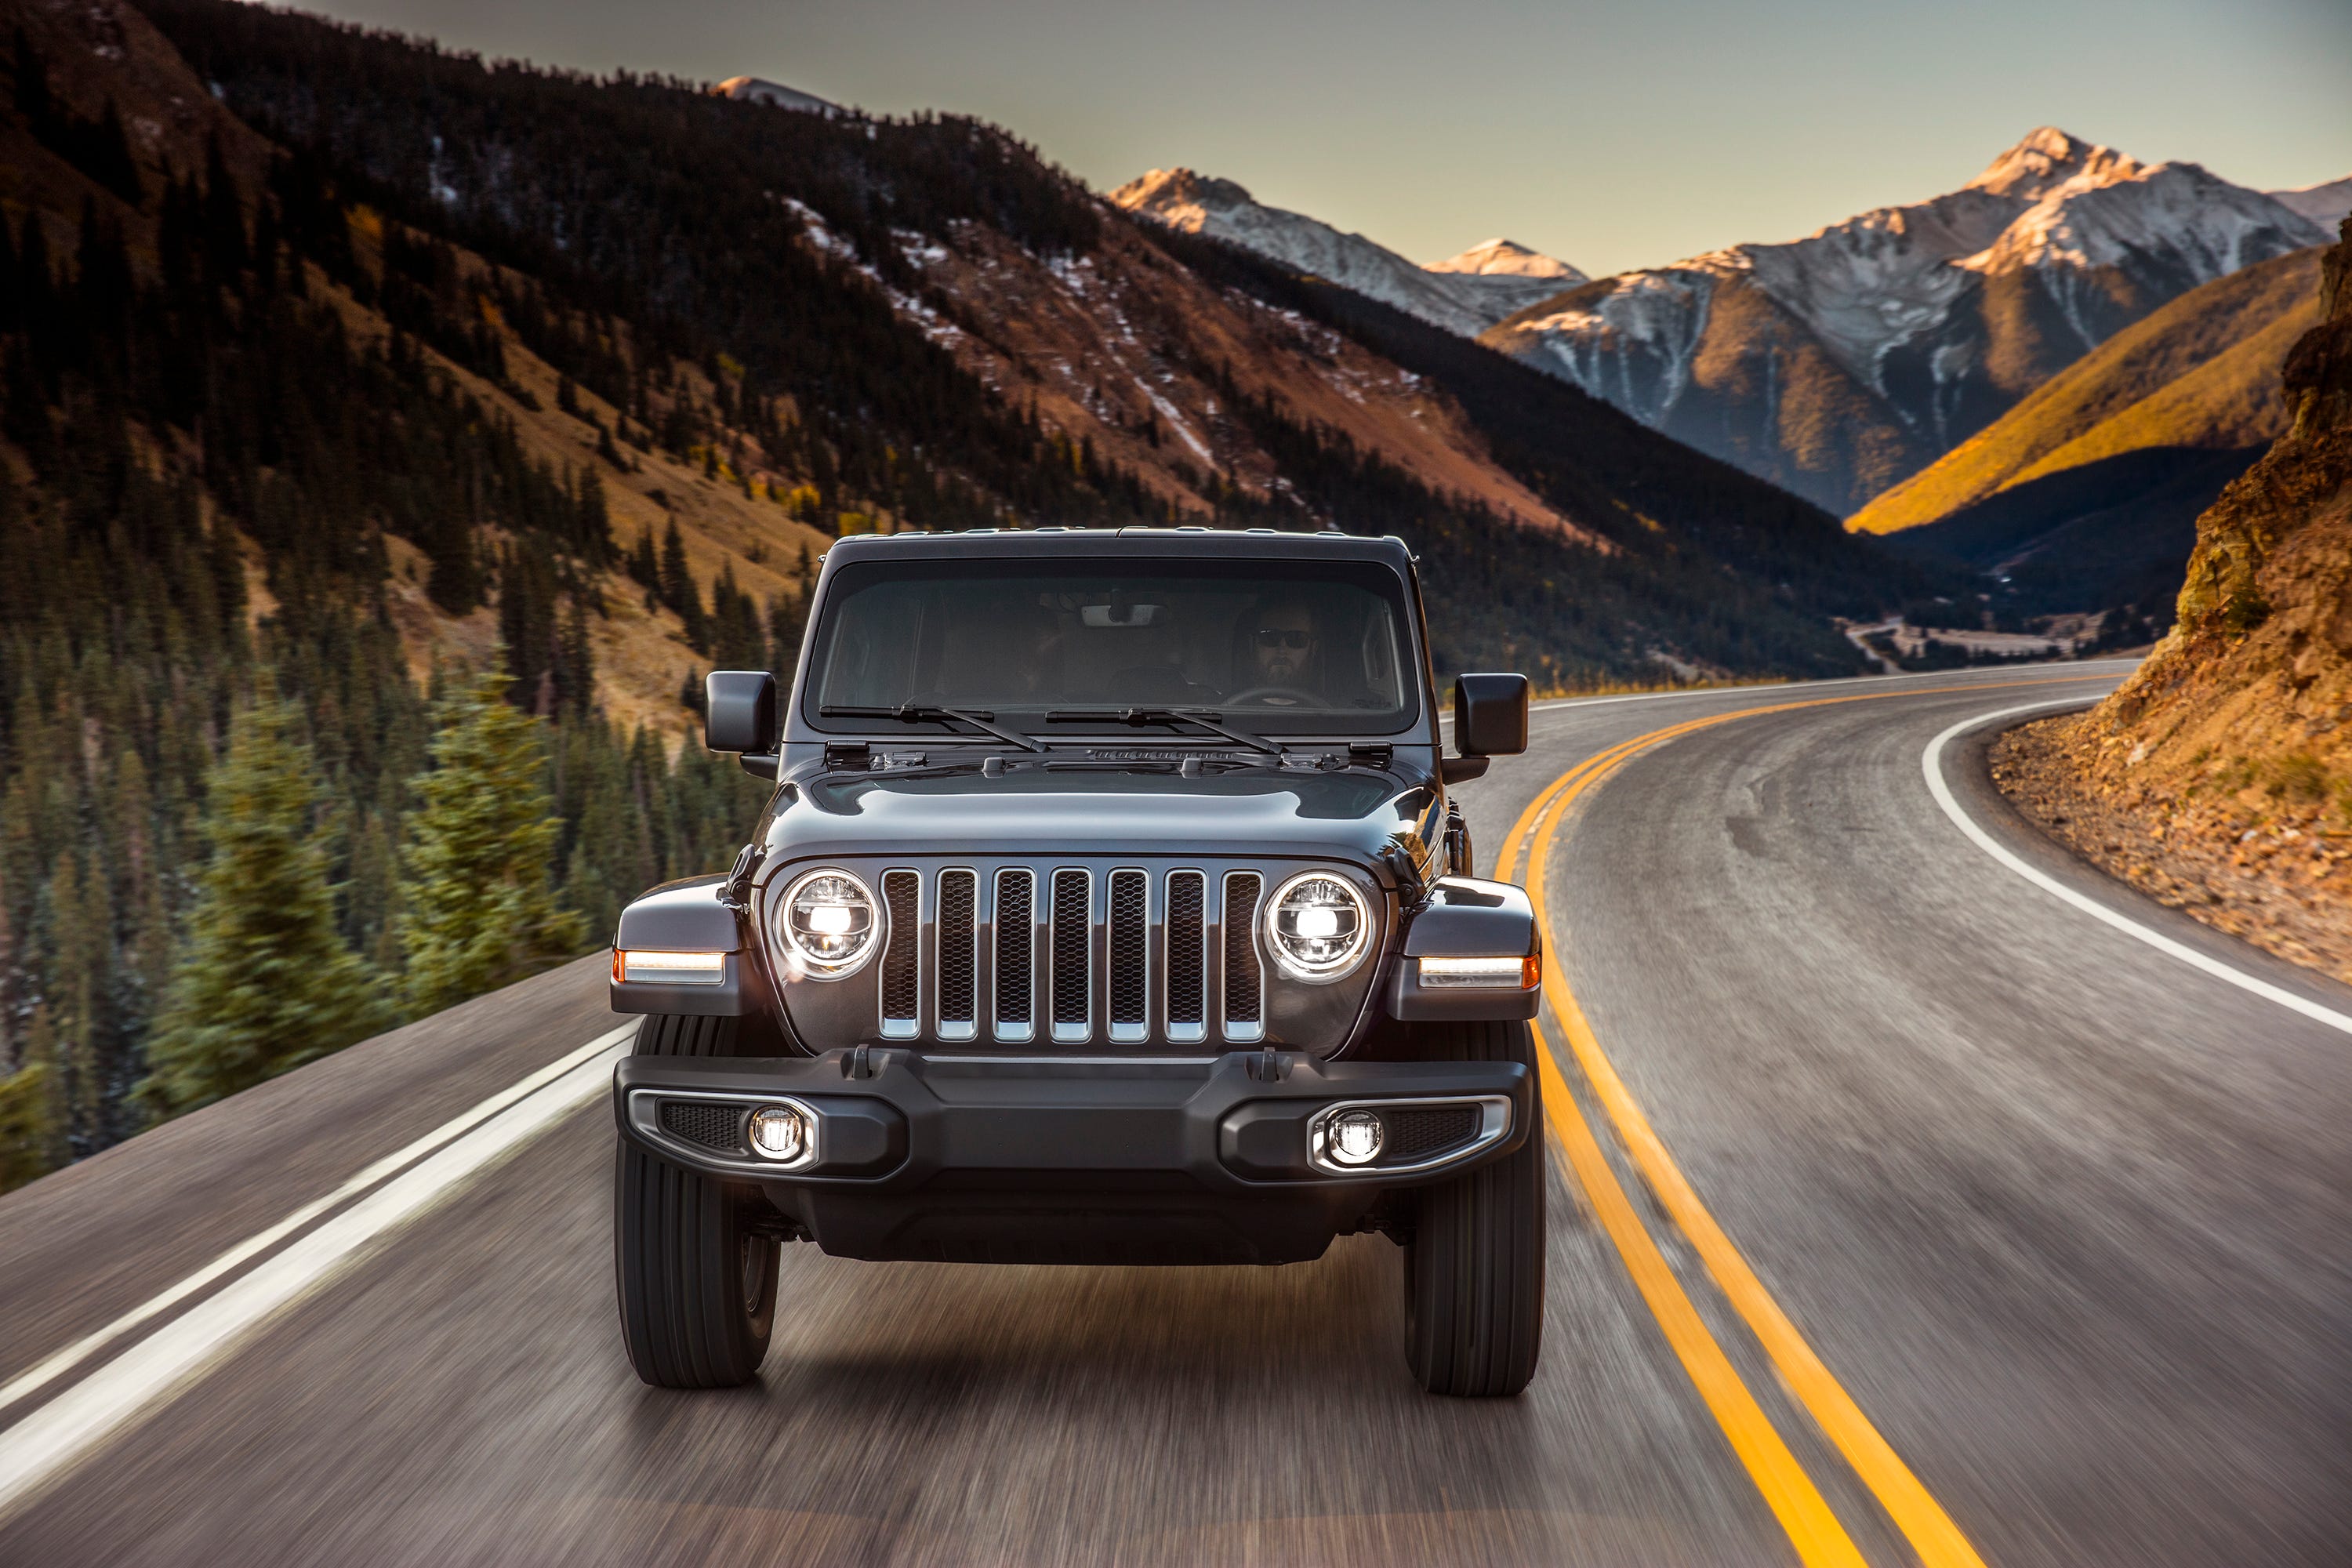 Fiat Chrysler faces a class-action lawsuit   over a so-called "death wobble" involving 2015-2018 Jeep Wranglers. The suit alleges the steering wheel of the  Jeeps can shake violently at highway speeds due to their solid front axle.